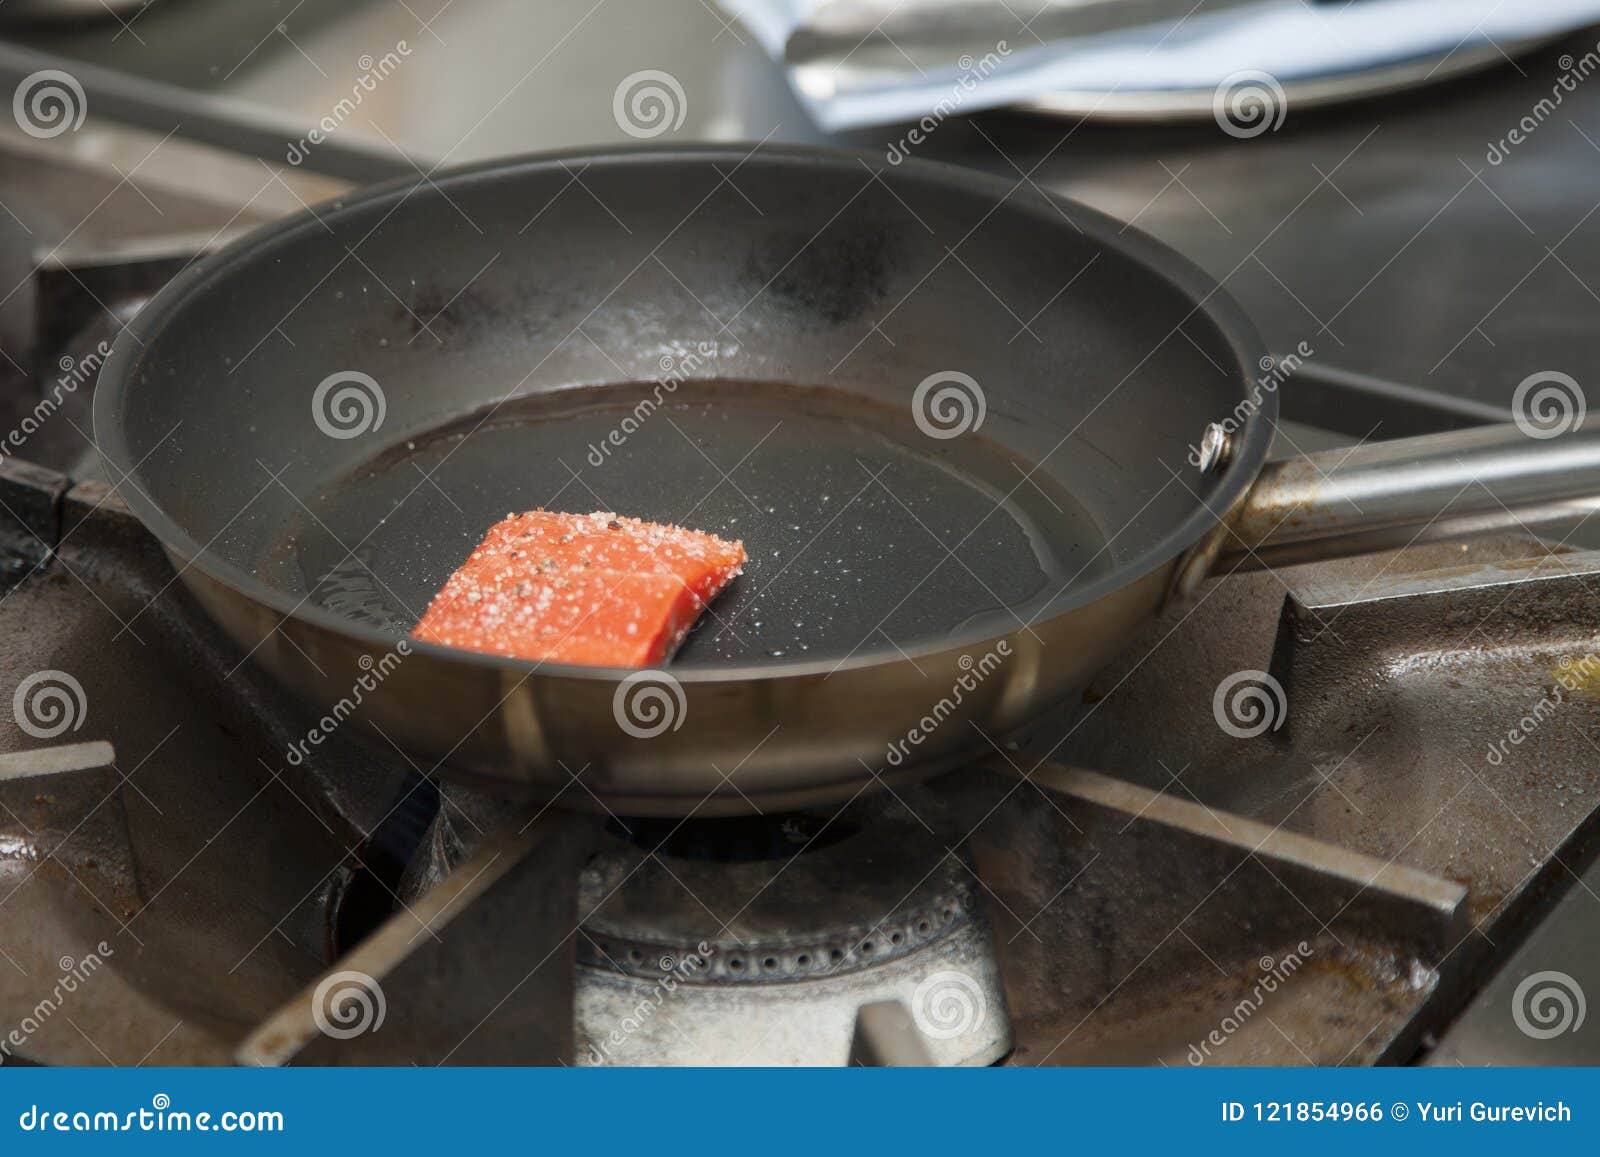 Fillet of Salmon Roasted in a Frying Pan Stock Photo - Image of dish ...